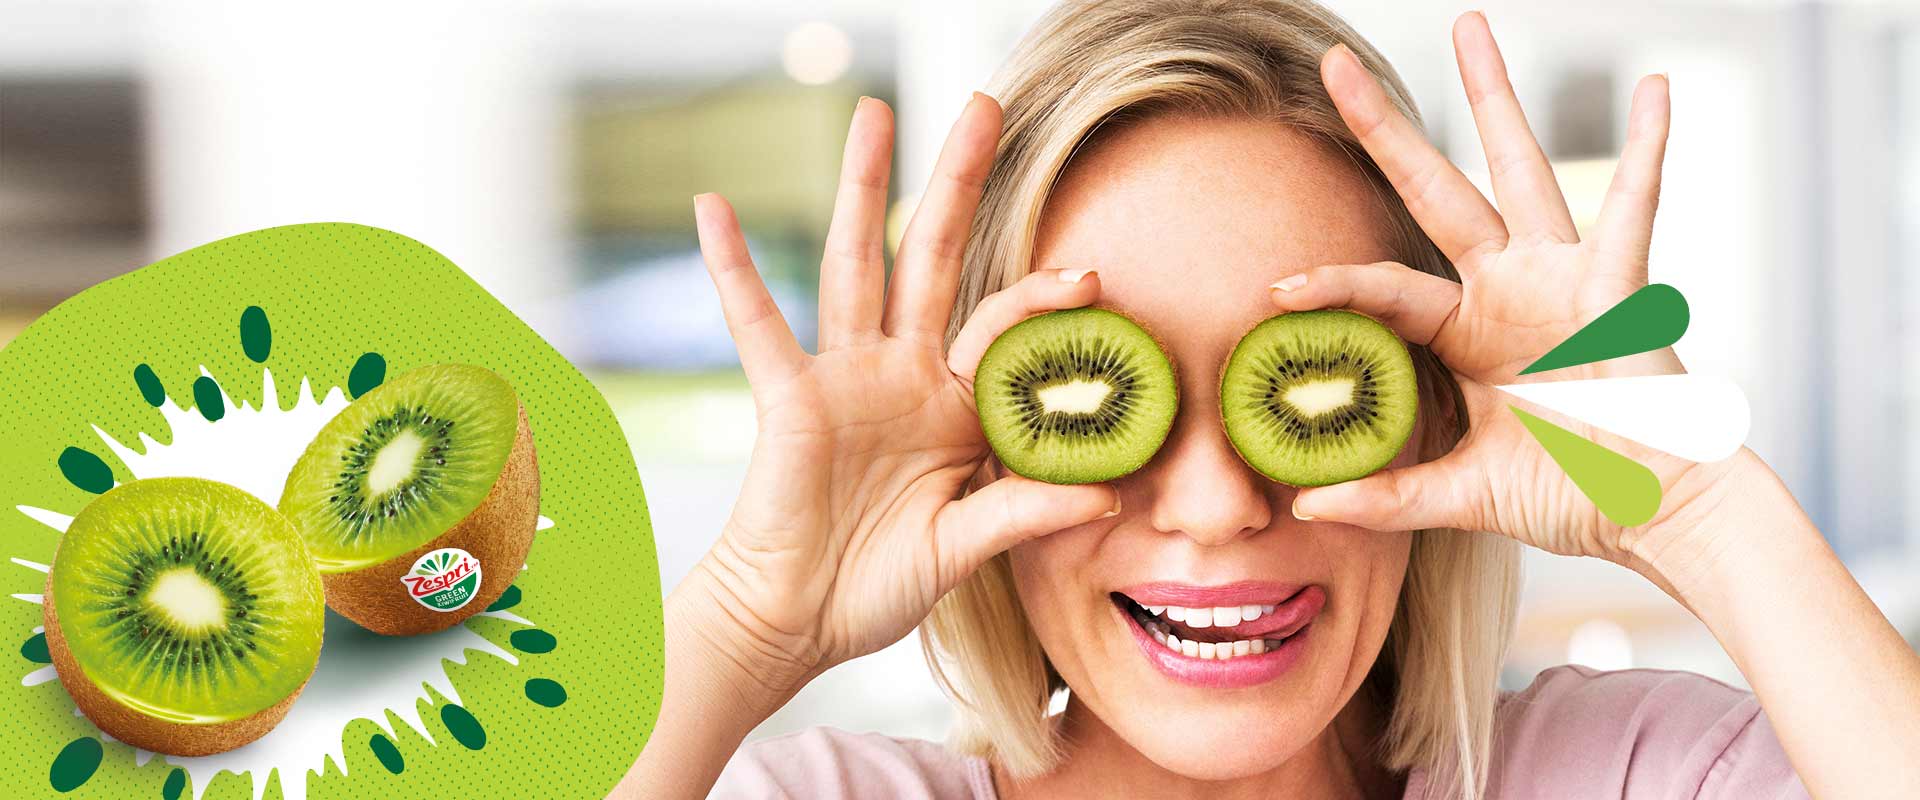 5 snacks featuring kiwifruit as the superfood star